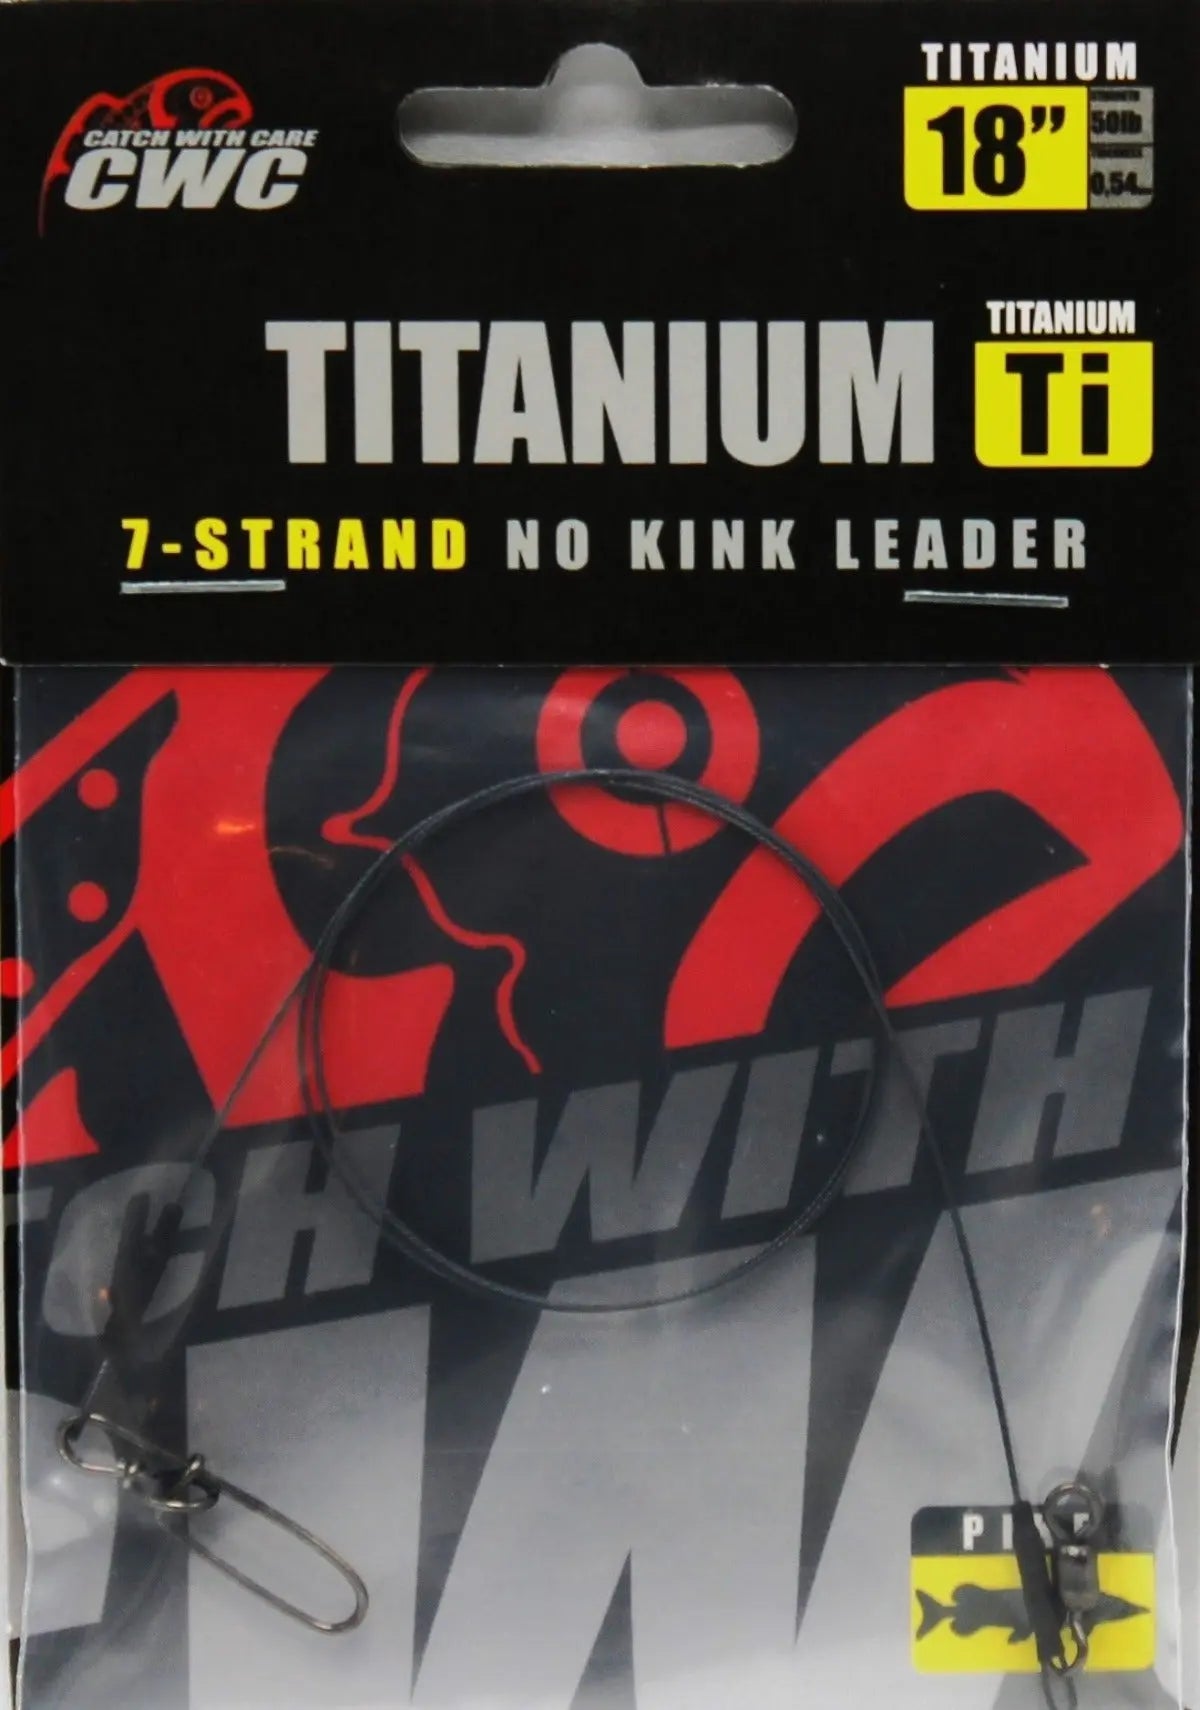 CWC Titanium Wire leader, 7-strand 18'' 50lb - Stay lok Catch With Care